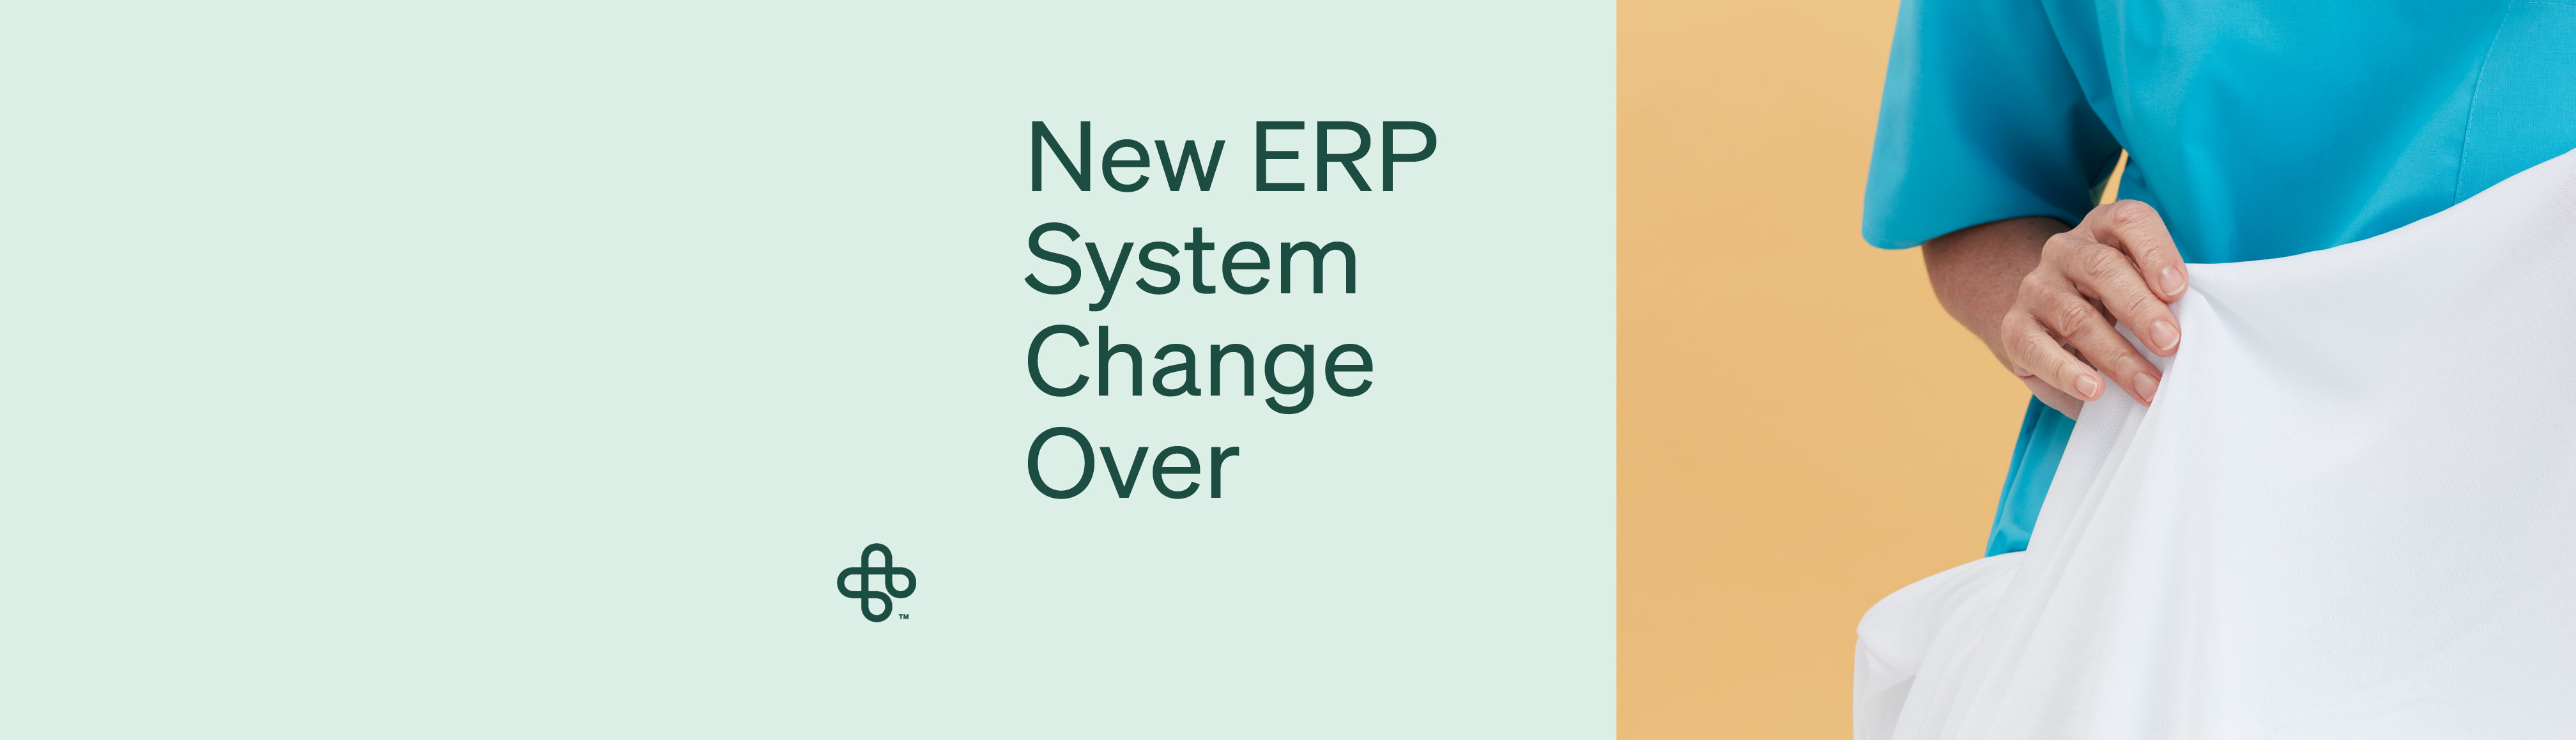 New ERP System Change Over Blog